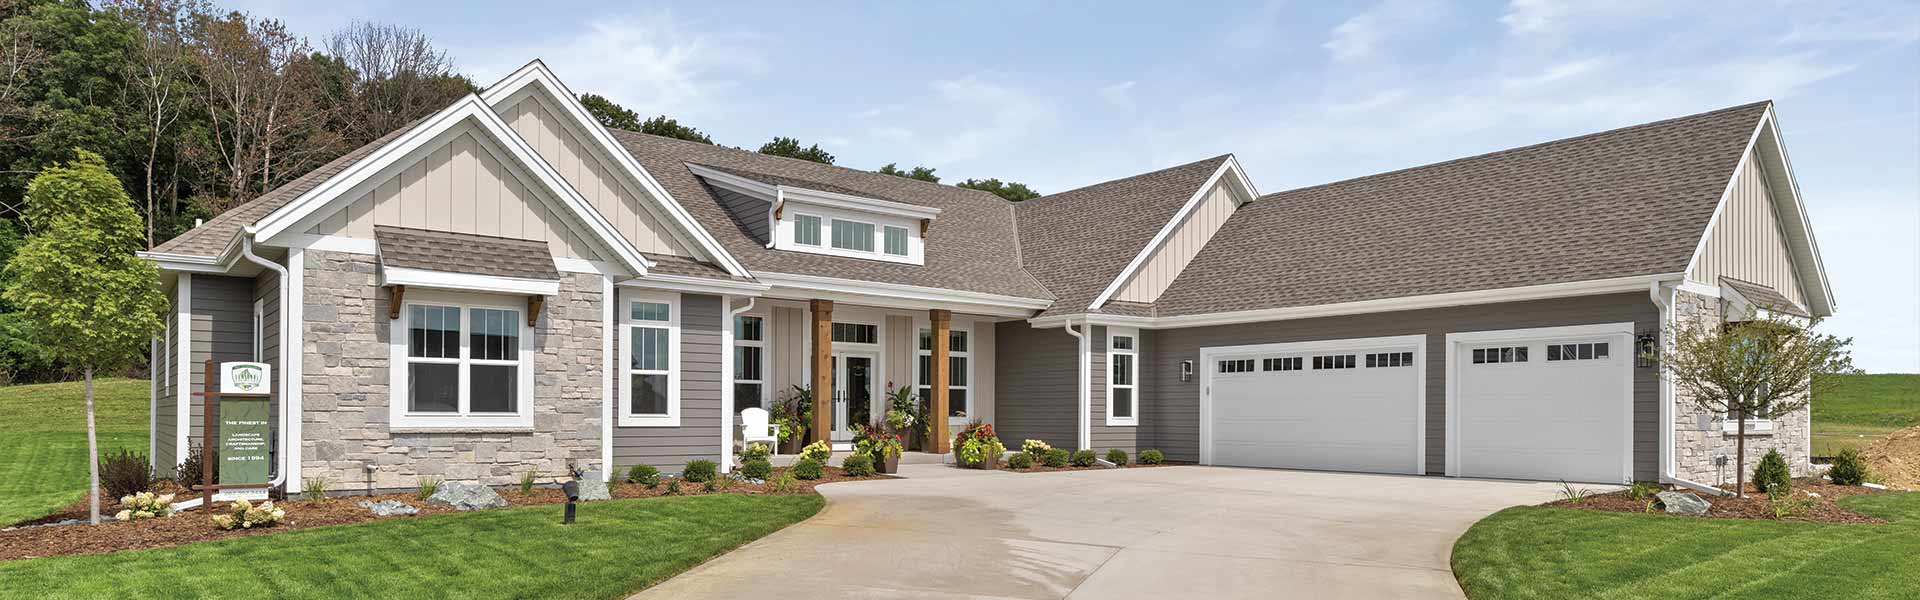 The Jenna Front Exterior by Demlang Builders